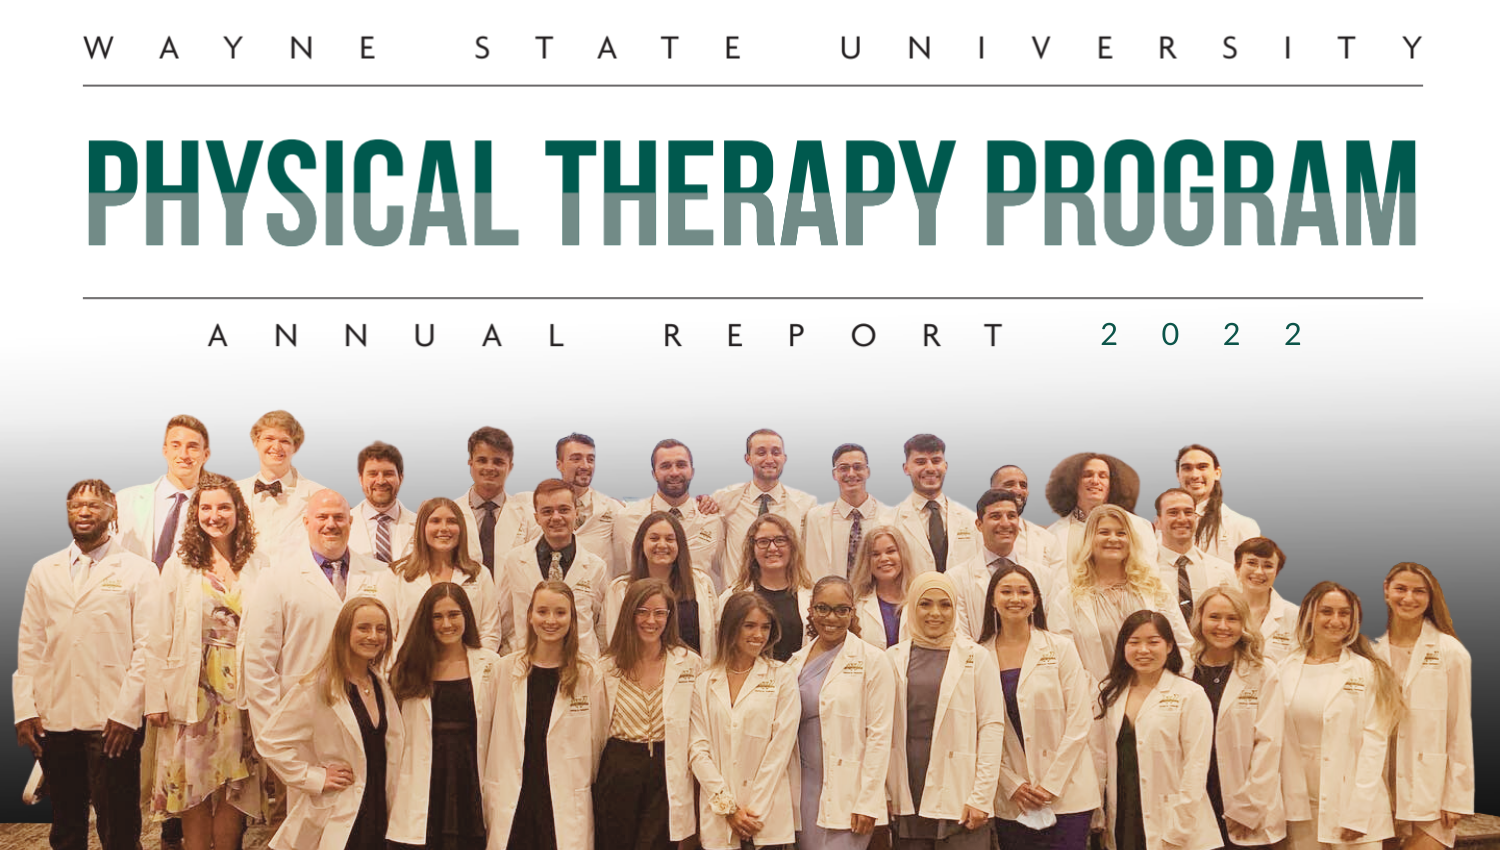 Wayne State University Physical Therapy Program Annual Report 2022